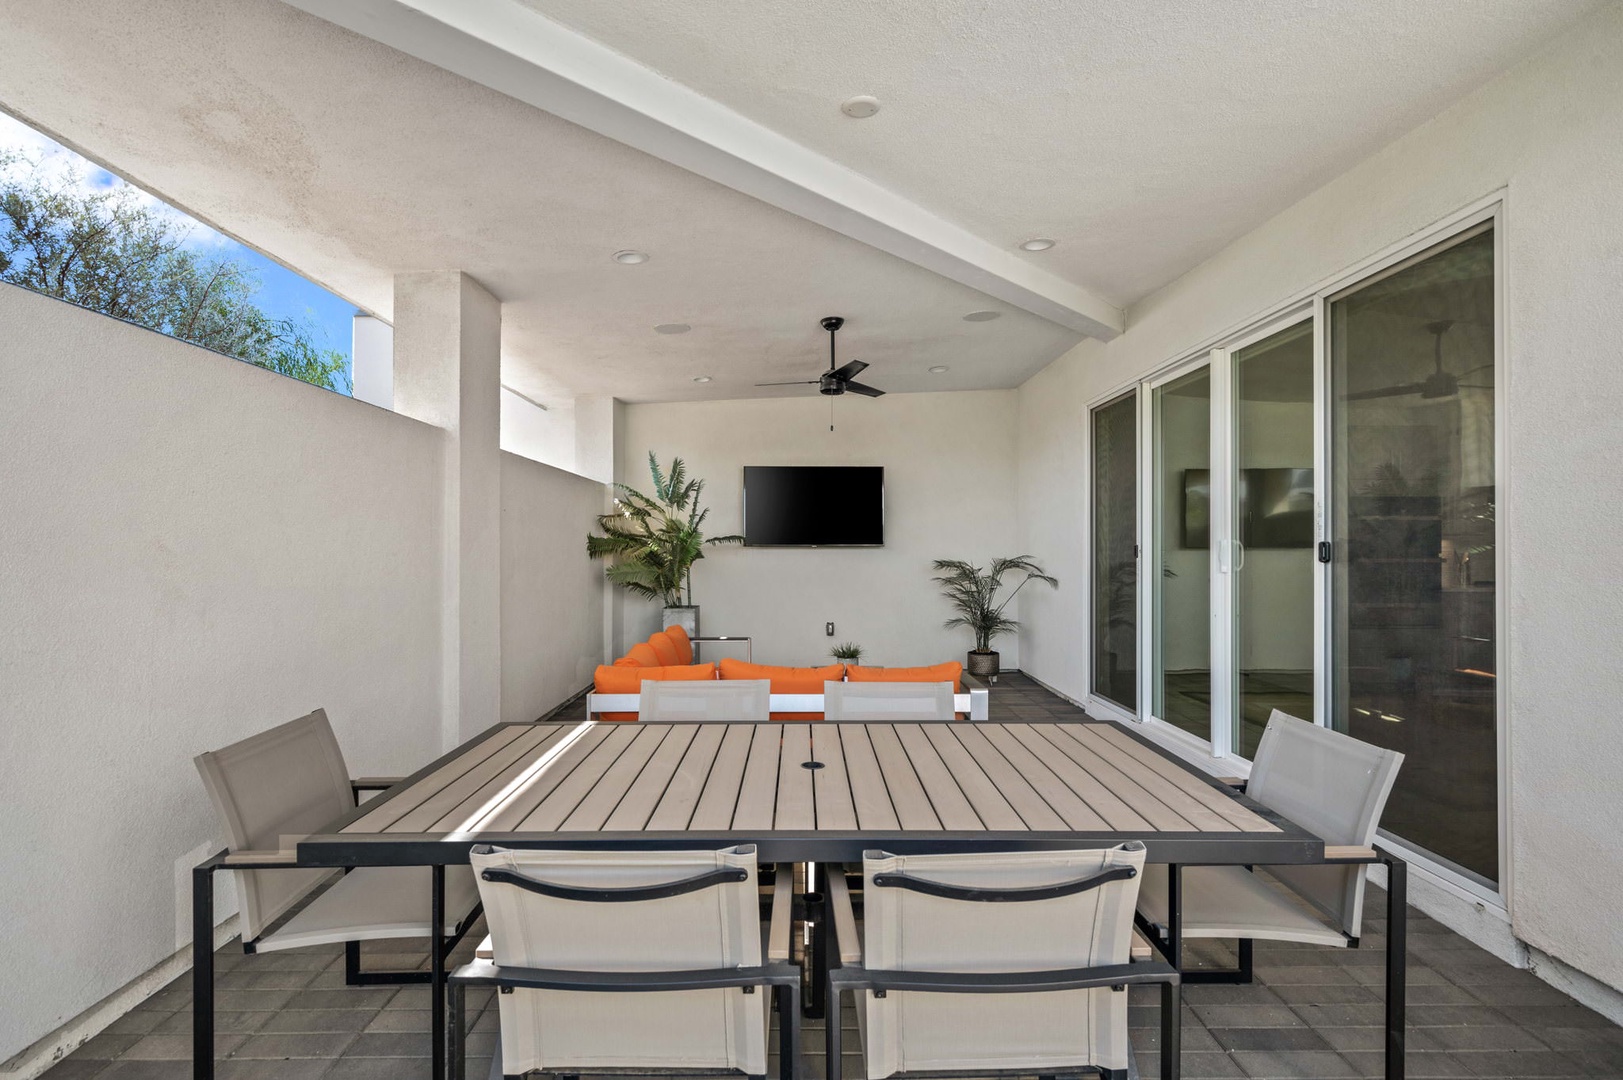 Covered outdoor patio